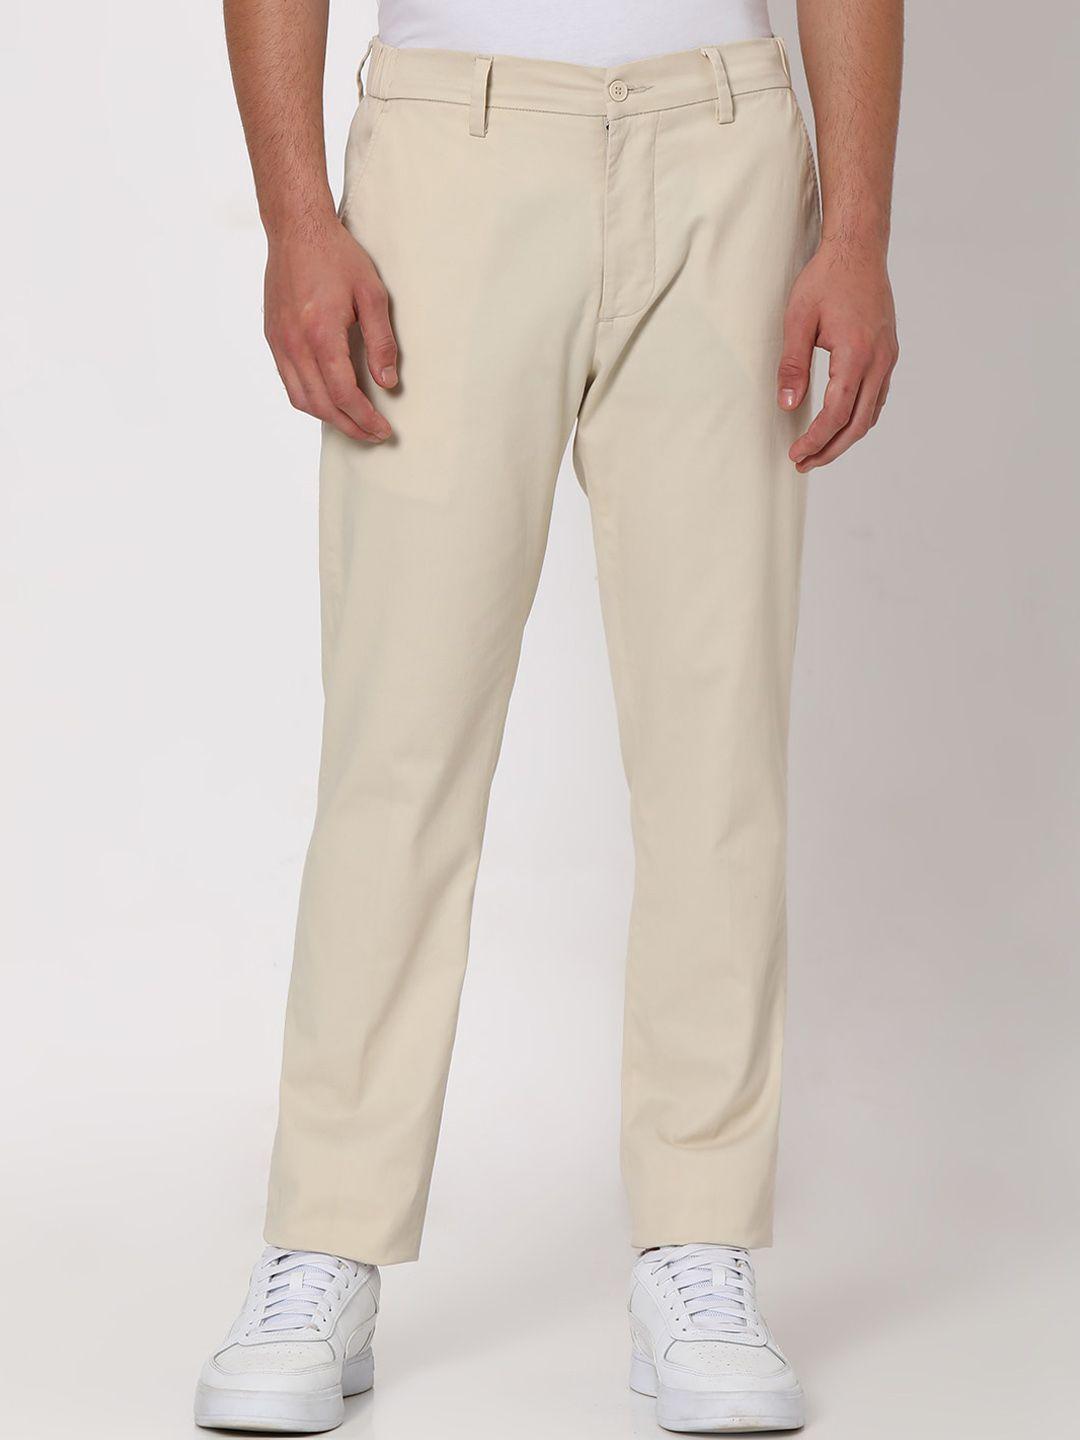 mufti-men-slim-fit-mid-rise-chinos-trouser